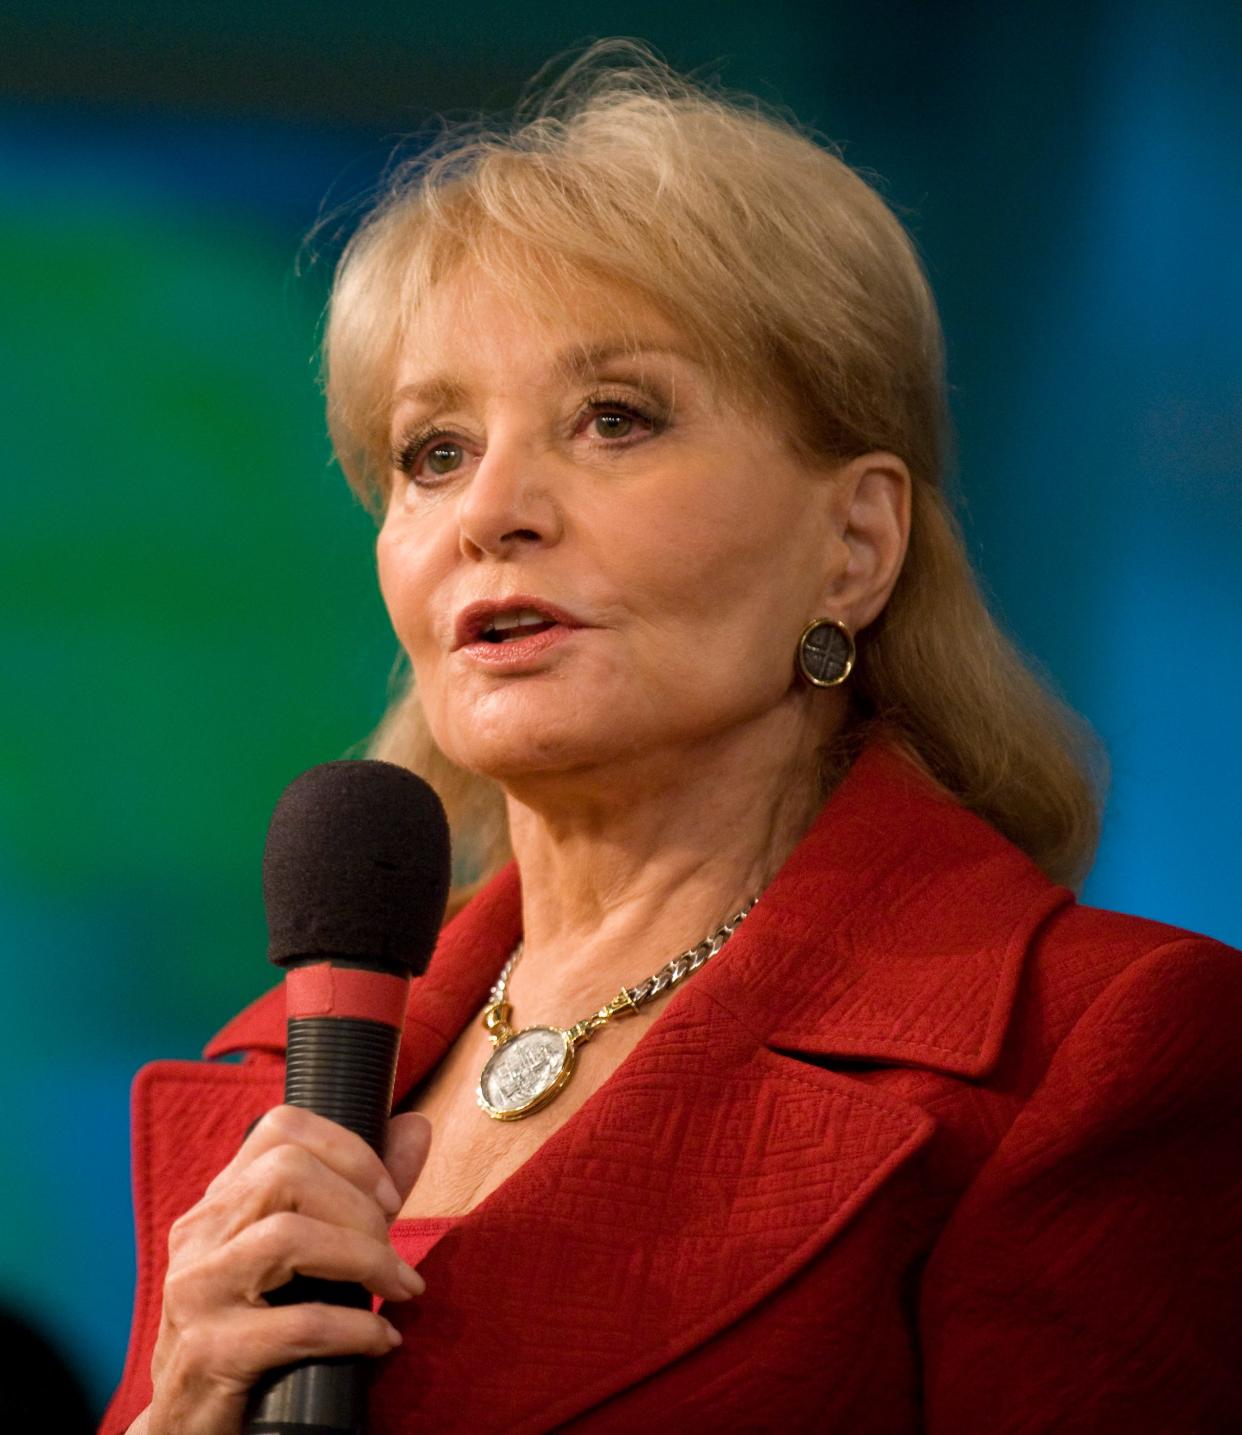 Barbara Walters talks to the studio audience during a commercial break during the first show of the 14th season of The View in 2010. Walters returned to the job after being off for several months for heart surgery. It was Walters' first live show since the heart trouble.